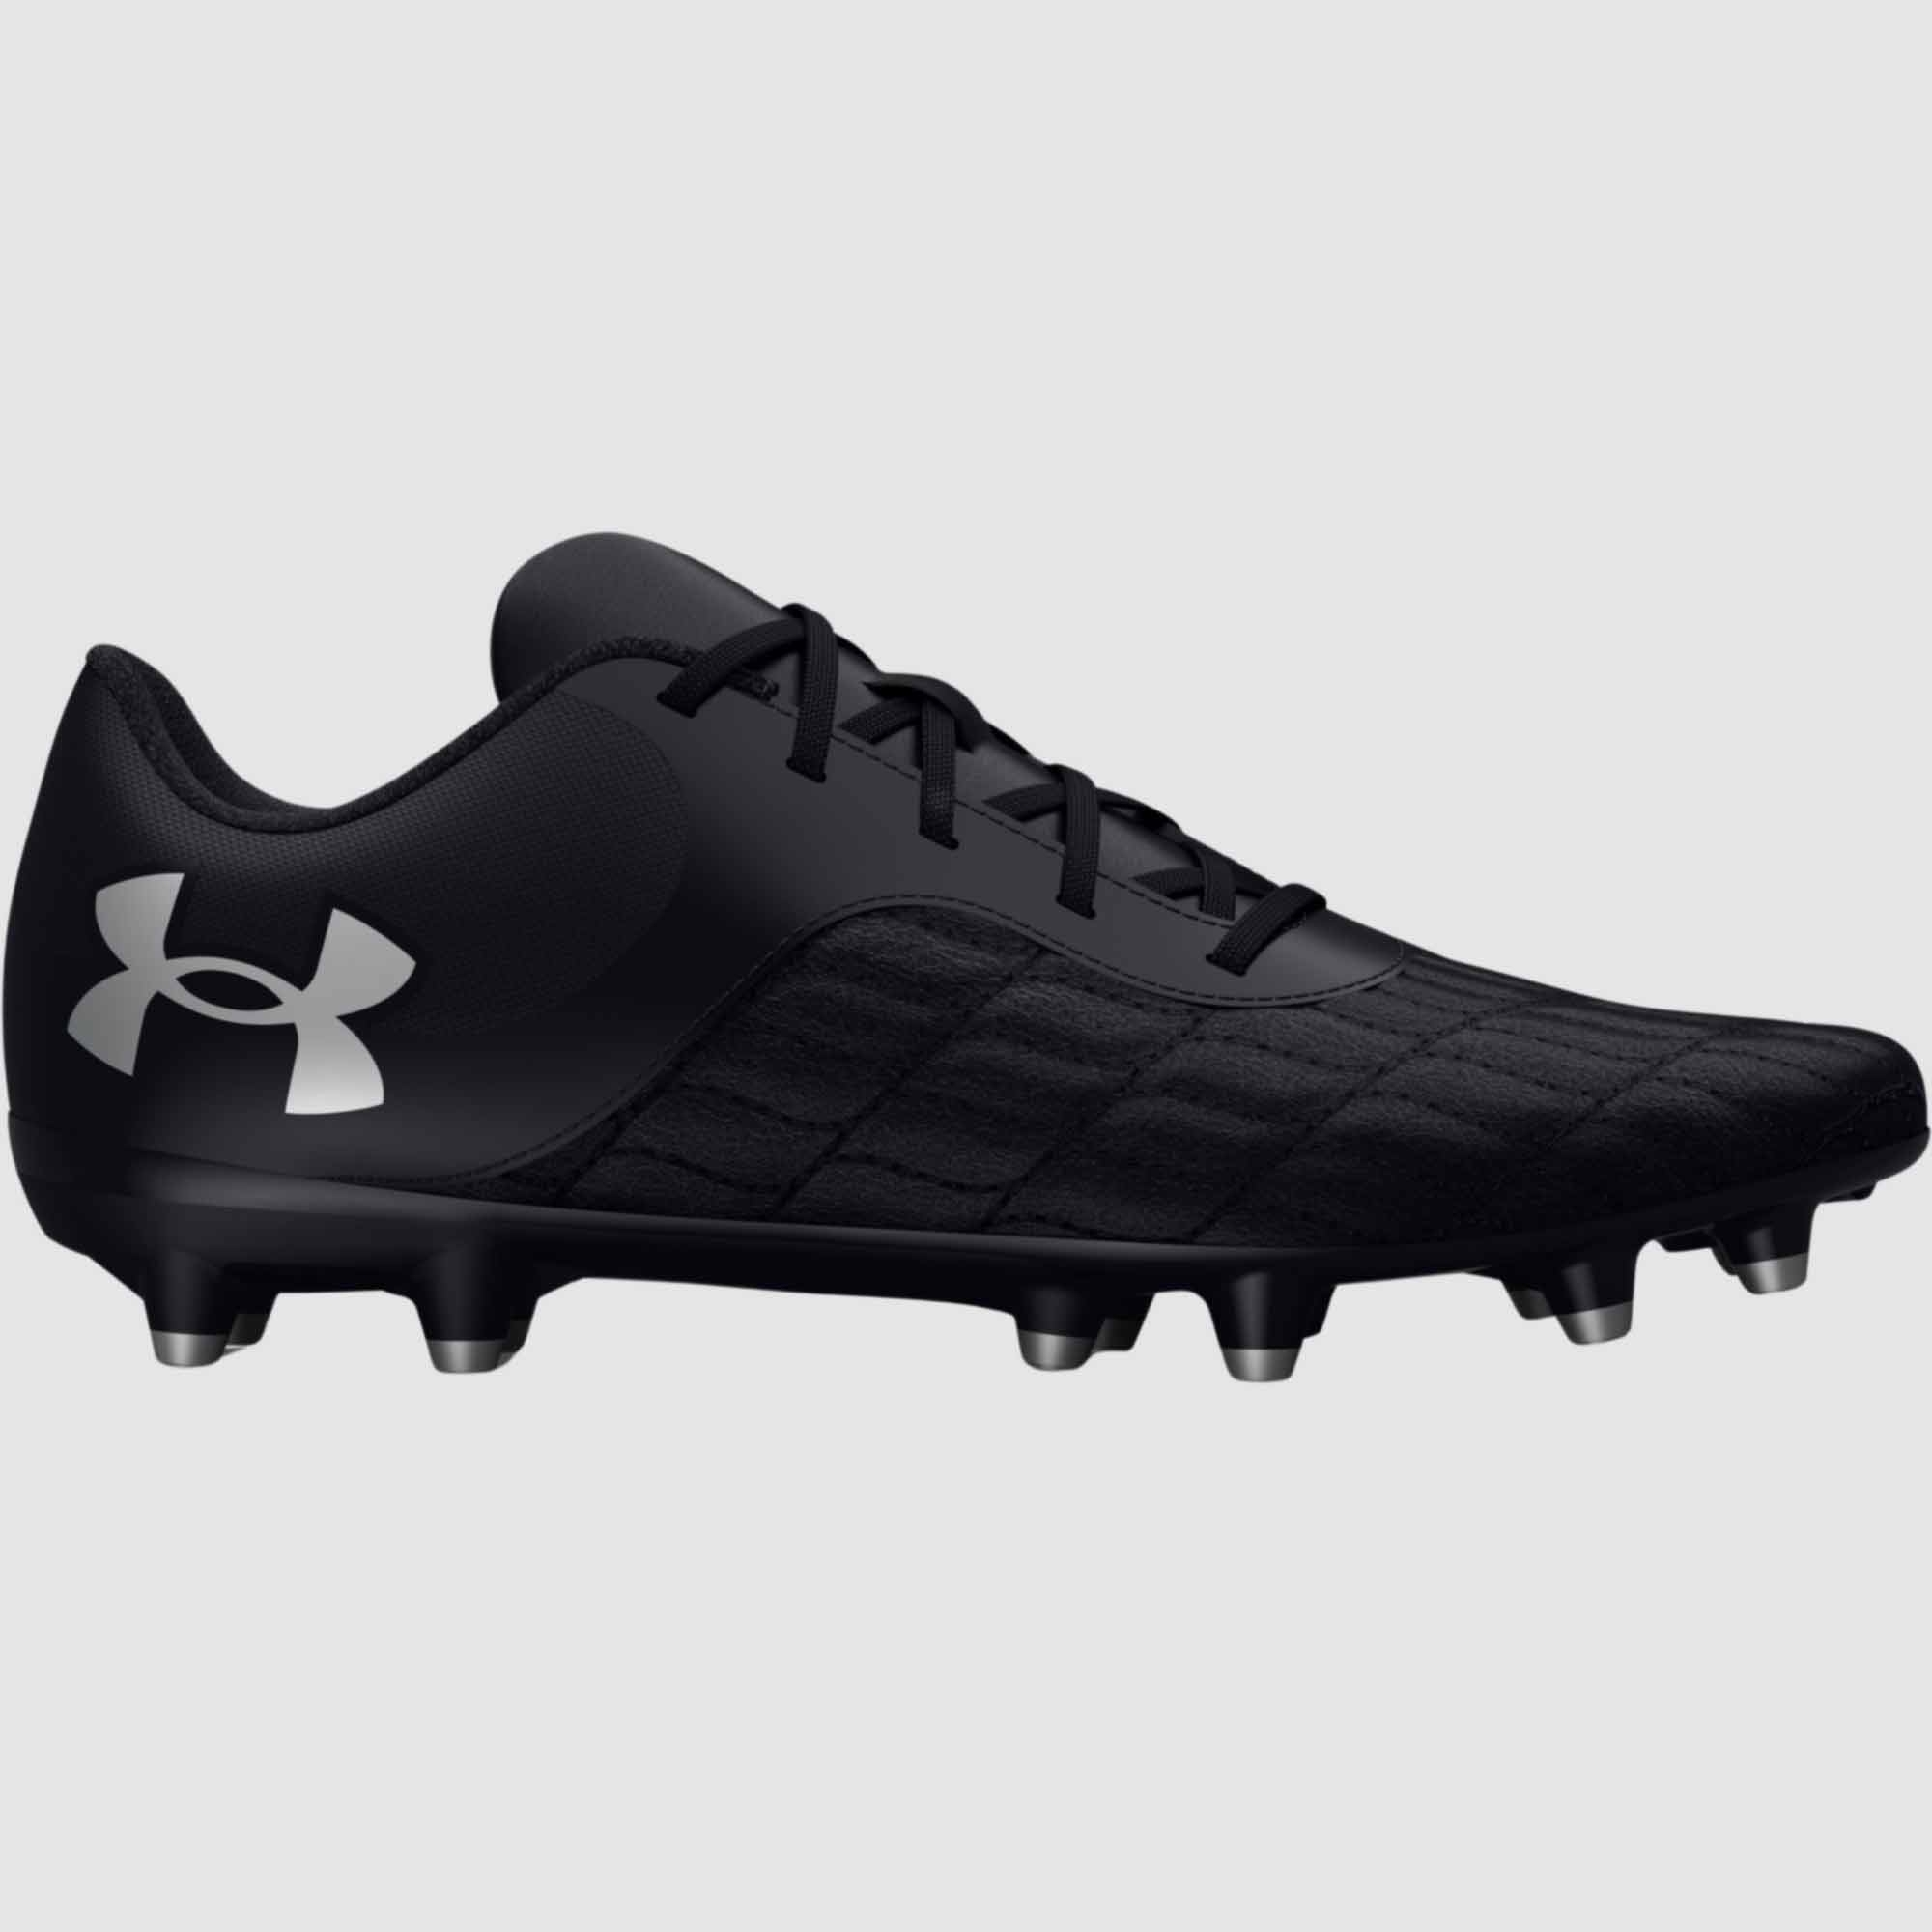 Under Armour Unisex Magnetico Select 3 FG Football Boots